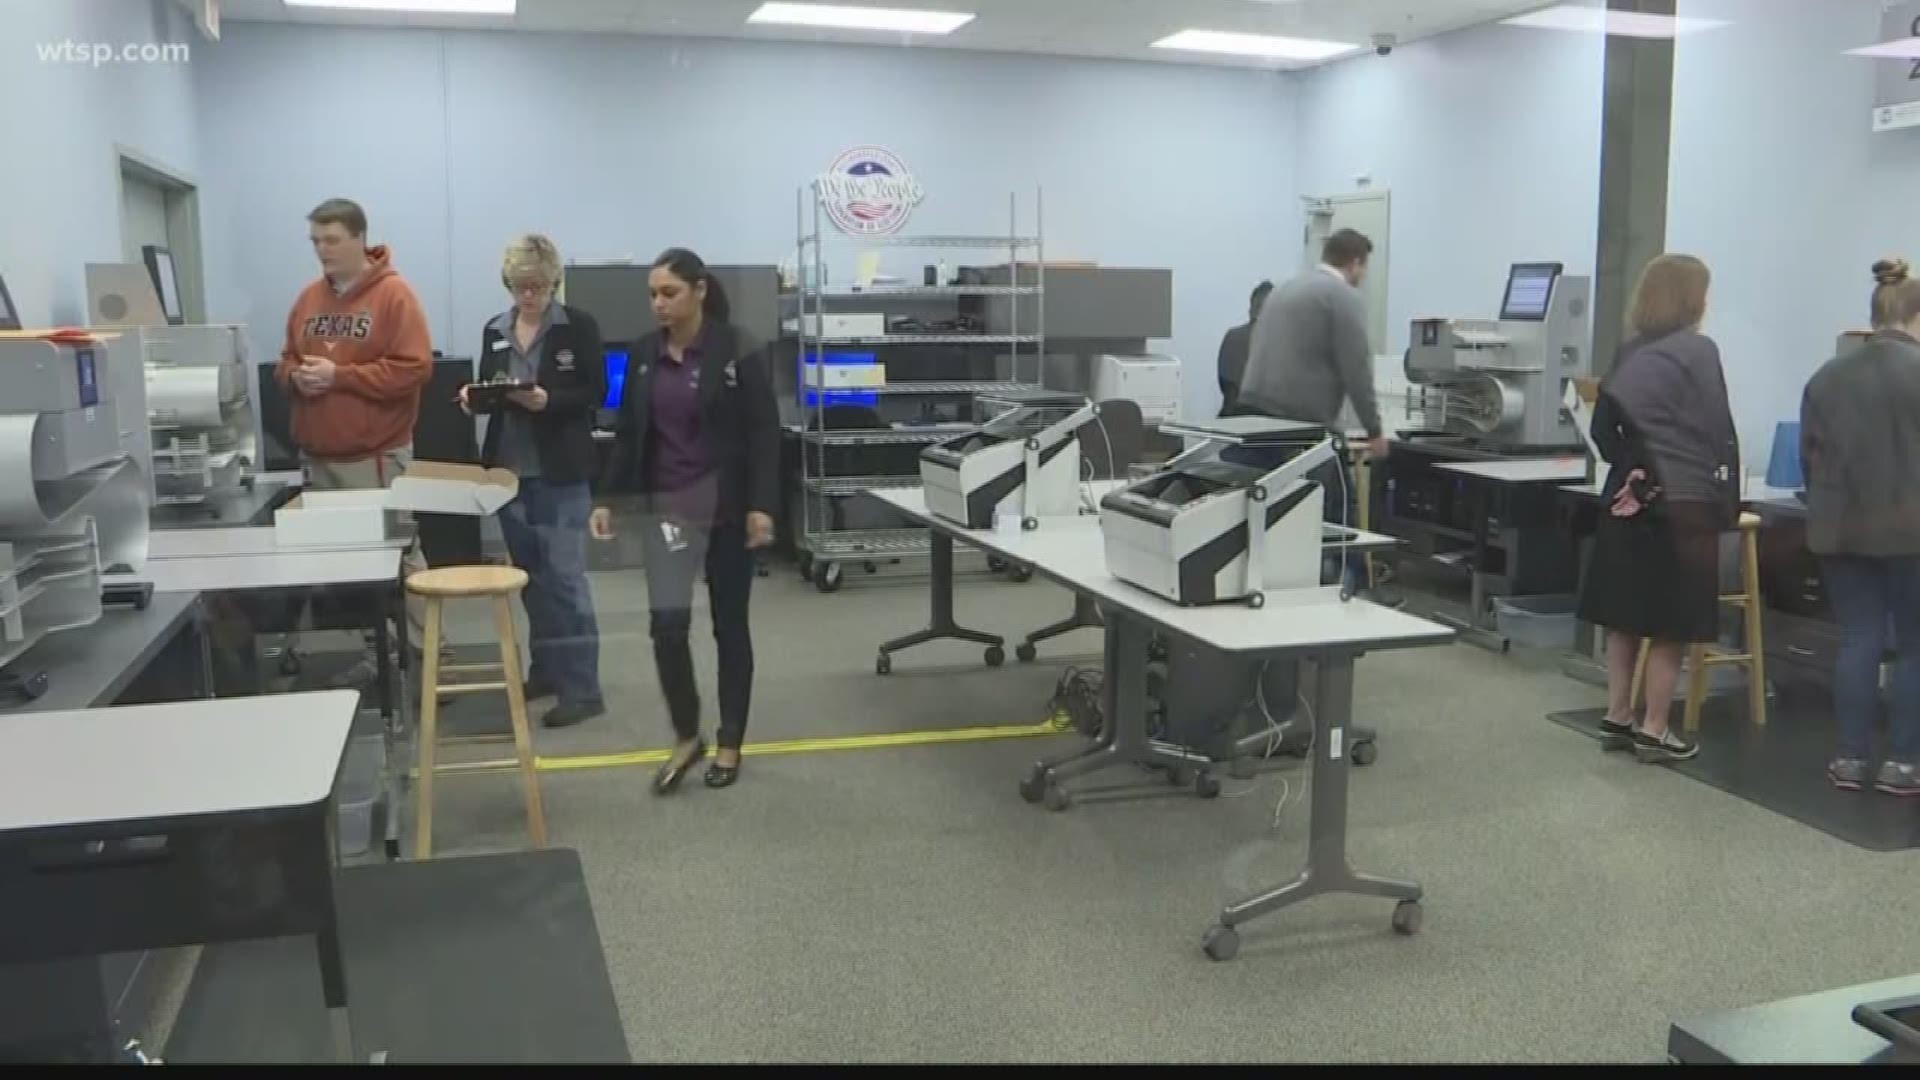 The manual recount was ordered for city council district 1.